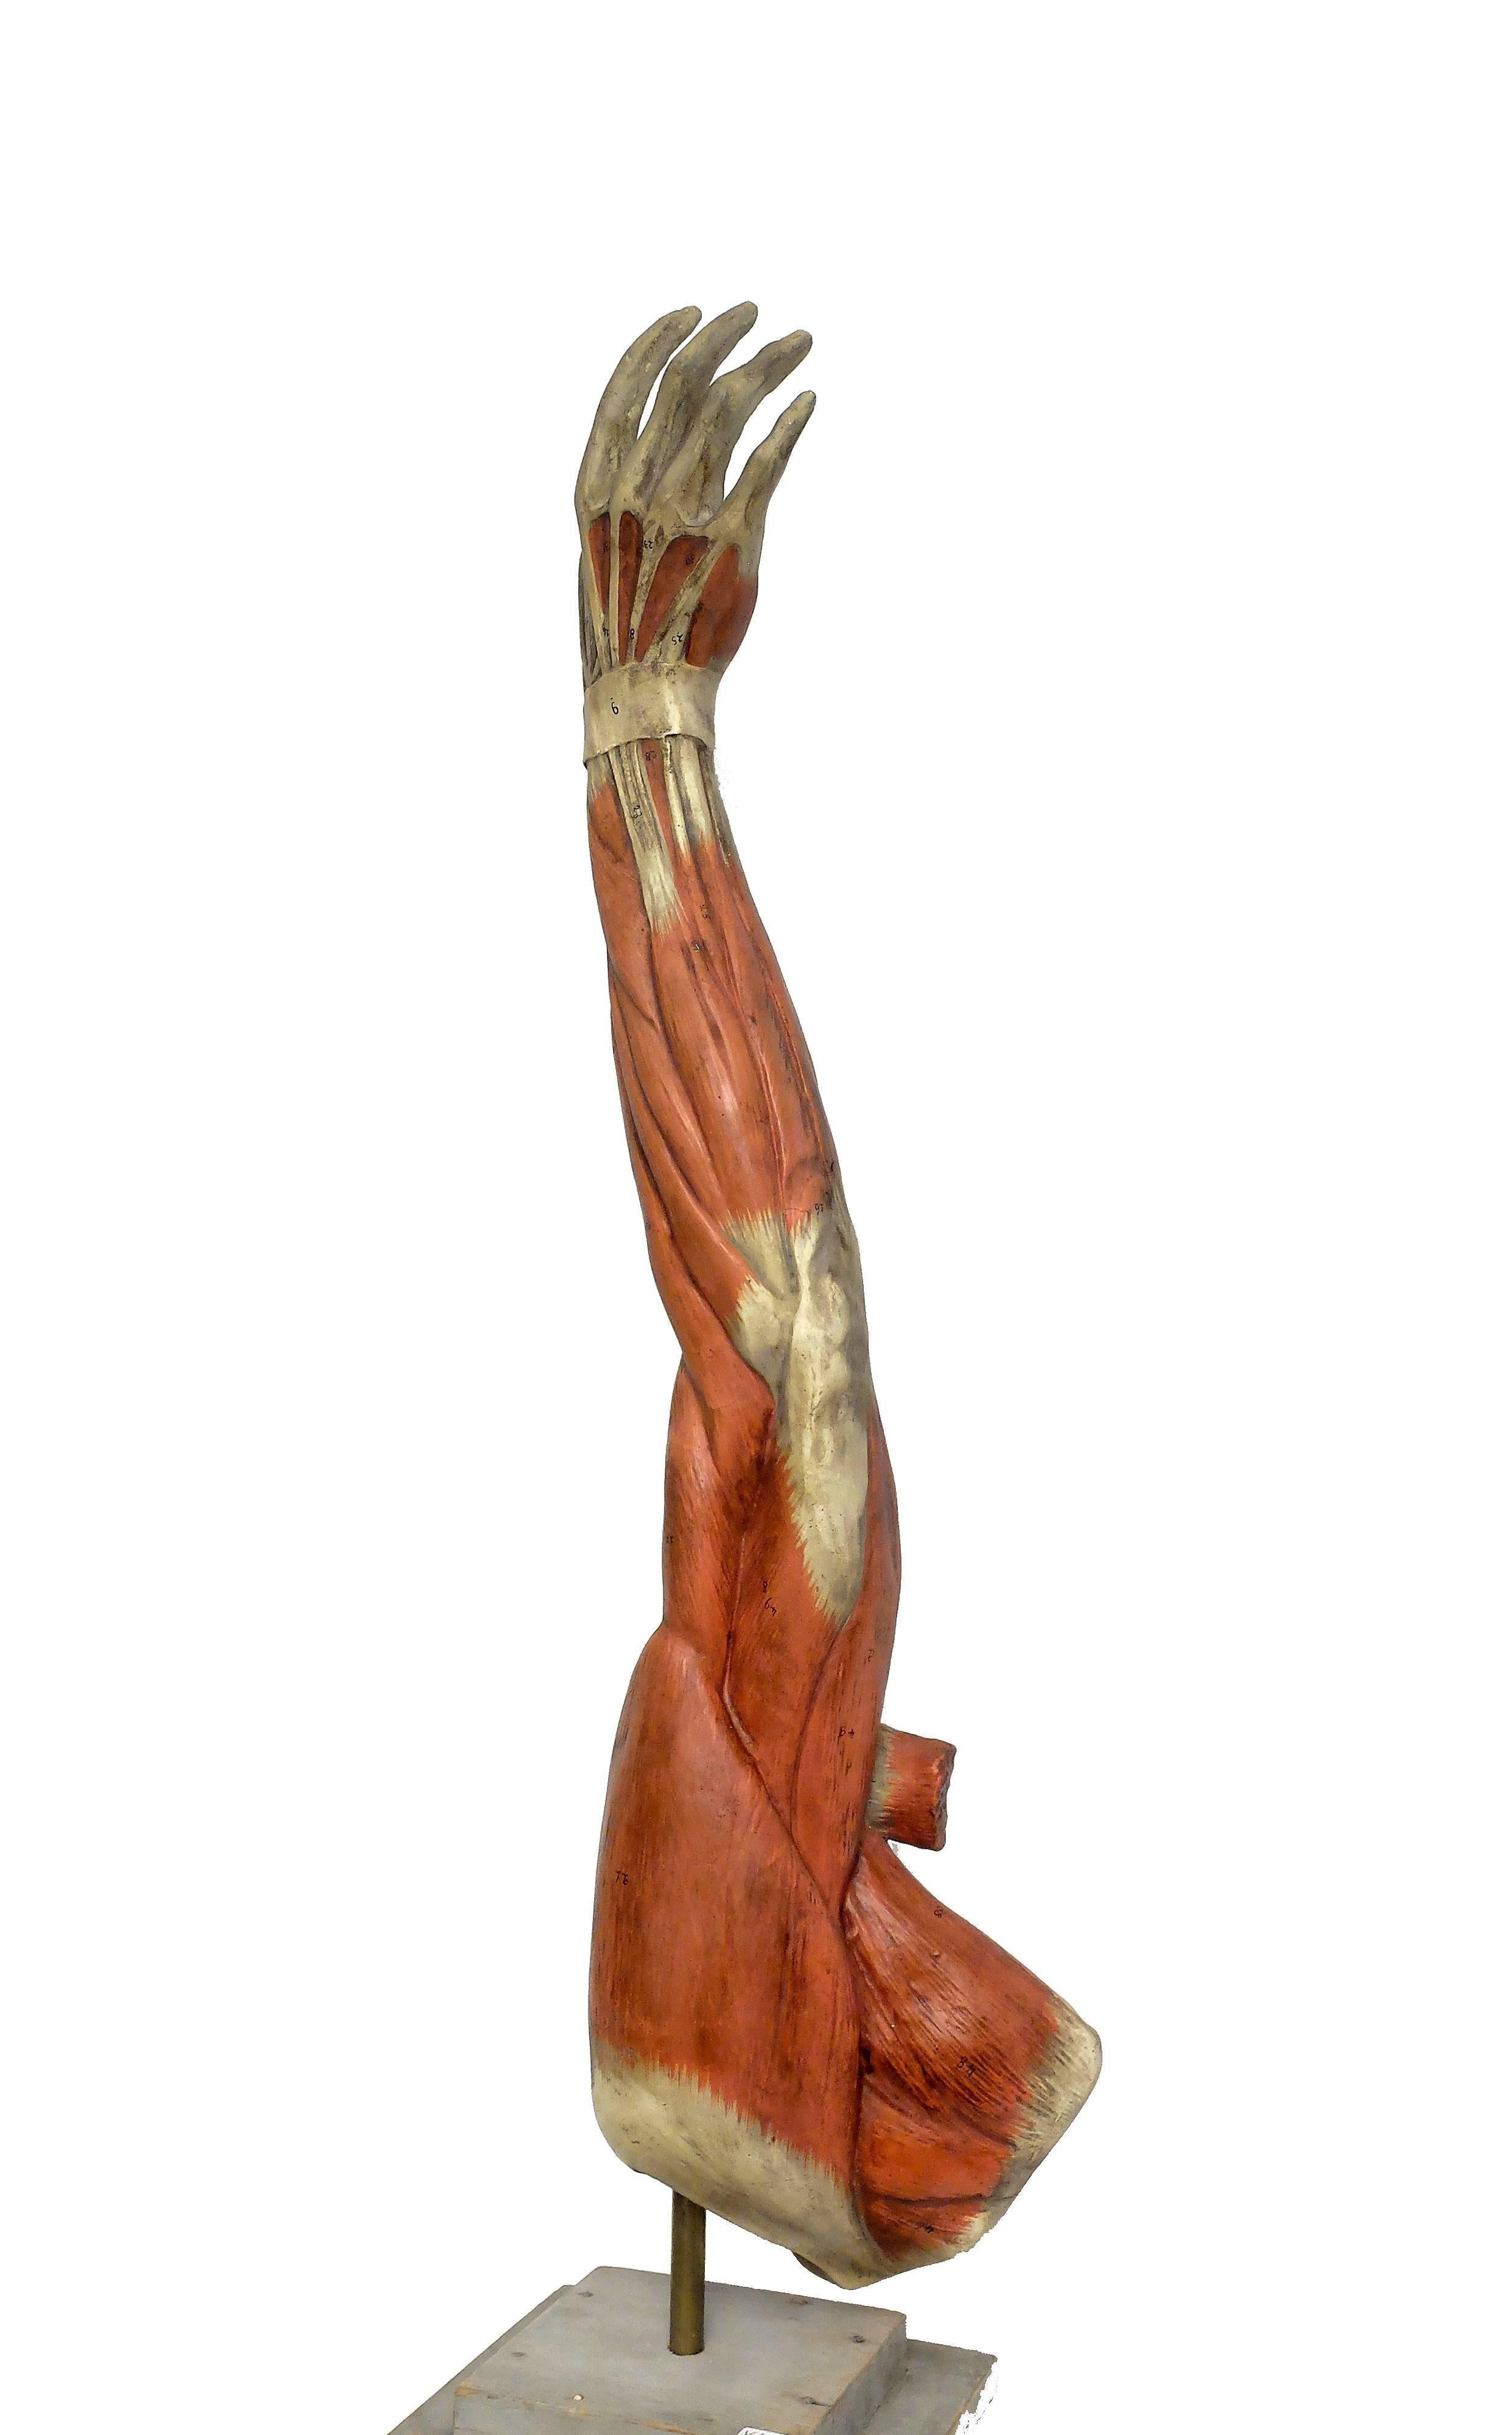 Italian Anatomical Model of an Entire Arm Made by Paravia, Milano, Italy, circa 1890